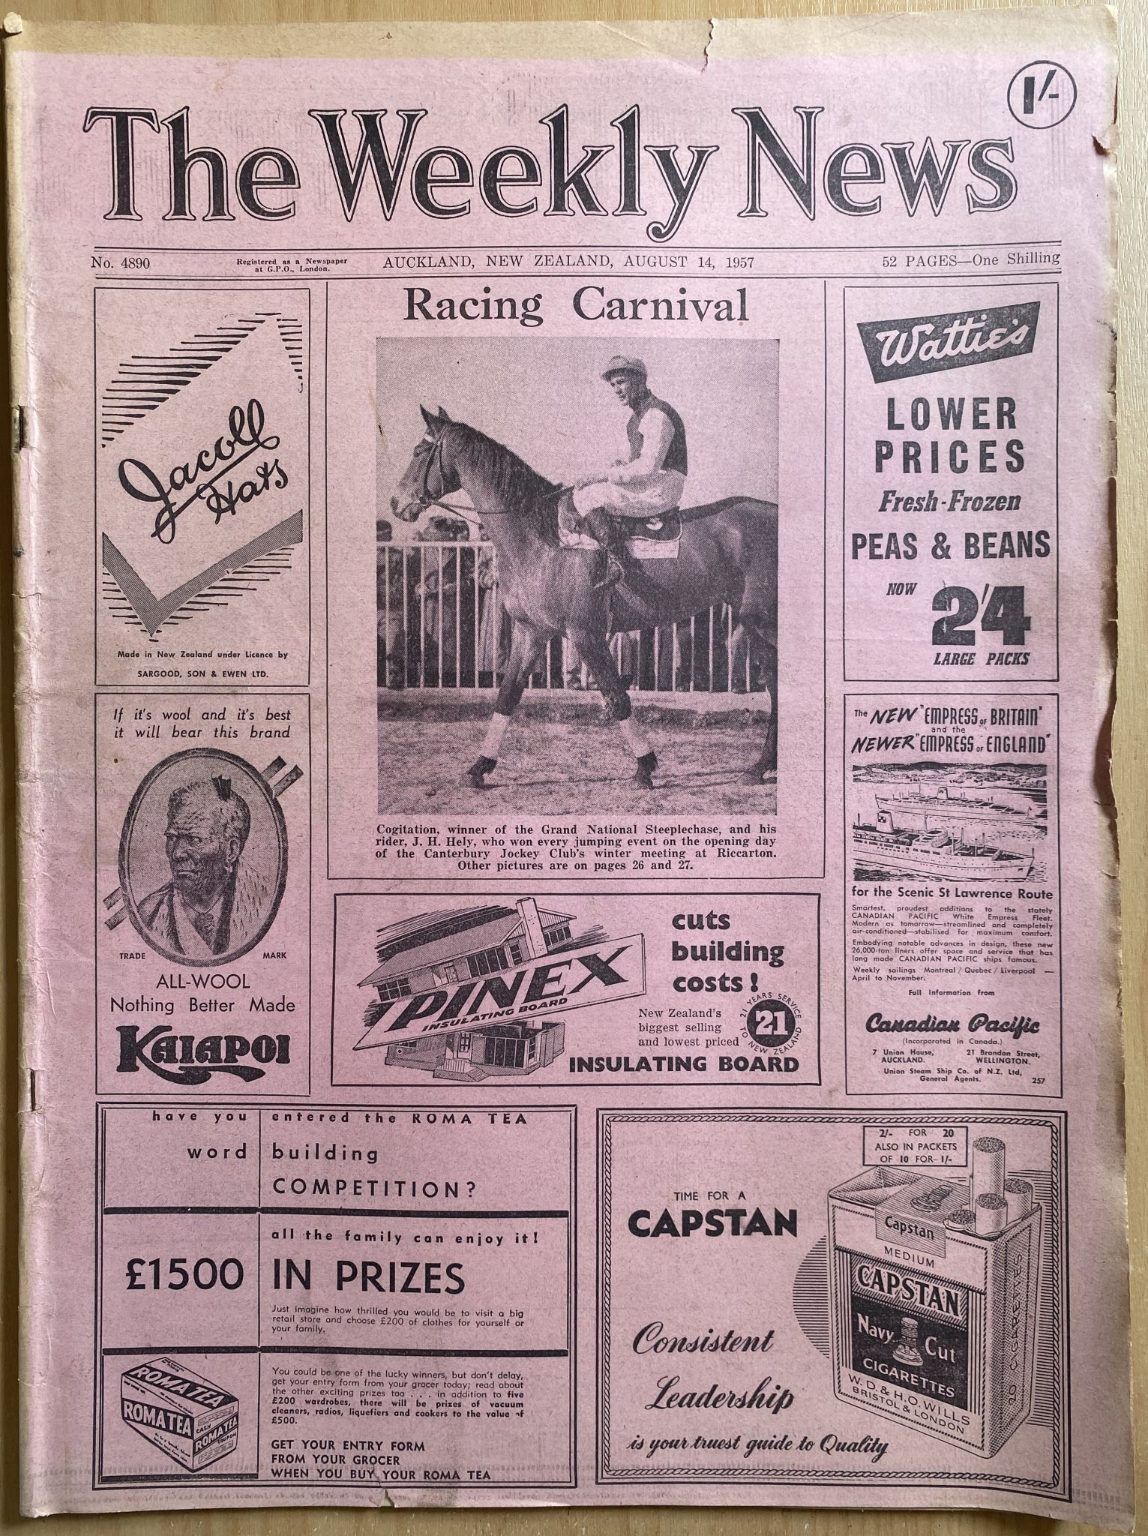 OLD NEWSPAPER: The Weekly News, No. 4890, 14 August 1957